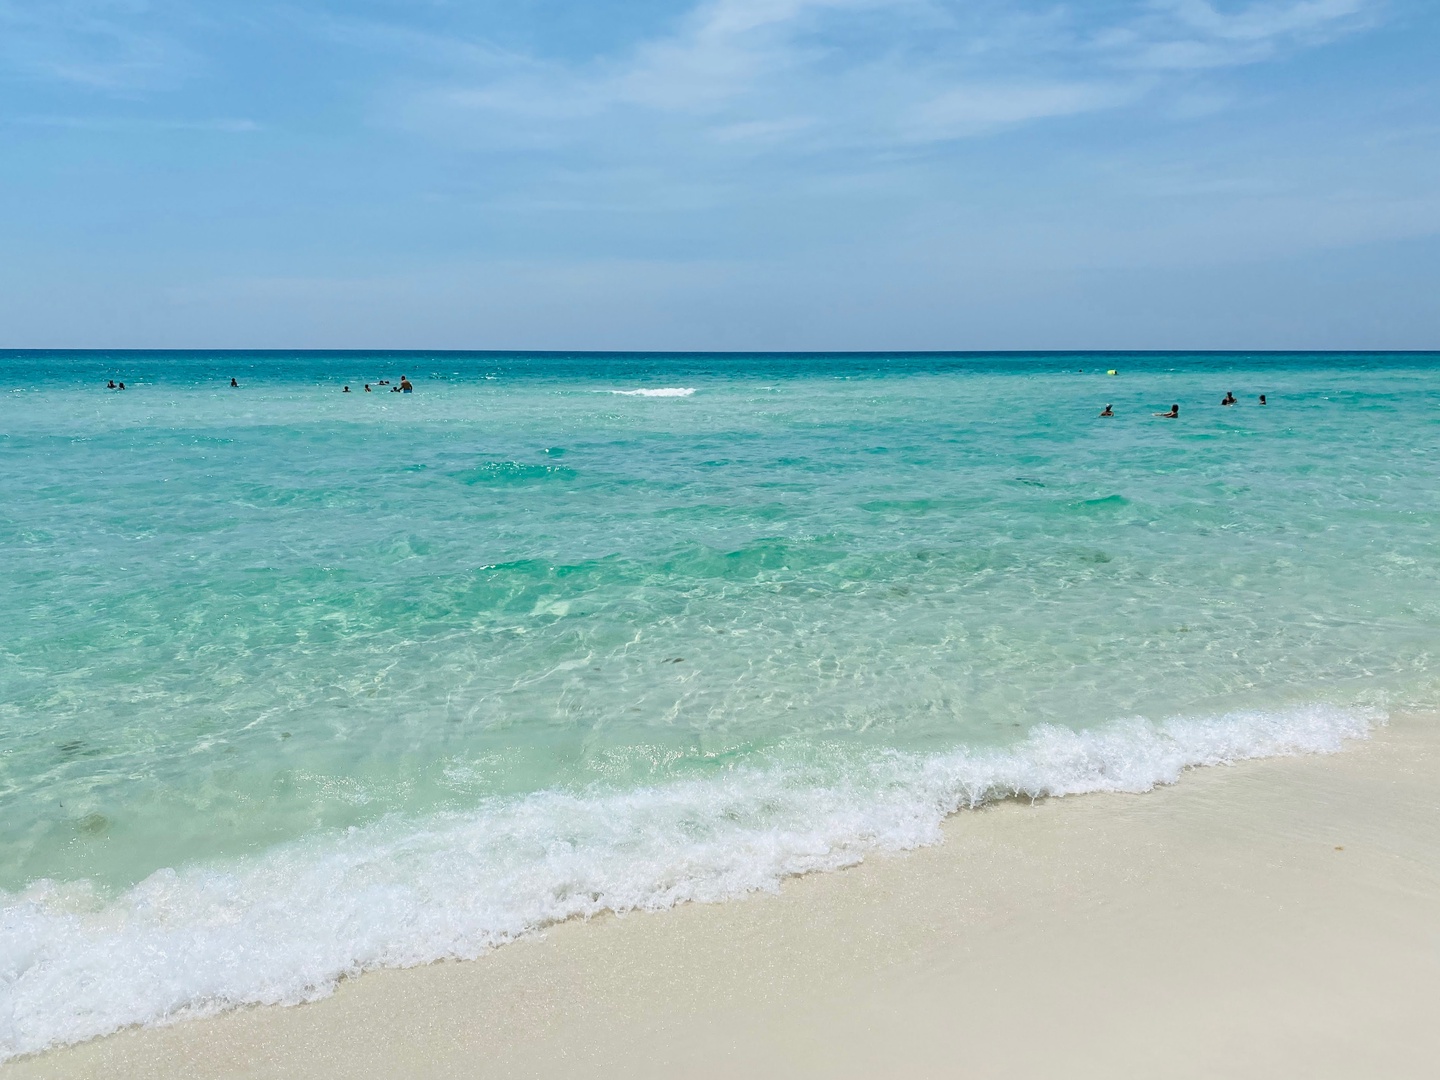 Sugar white sands and emerald waters await you!